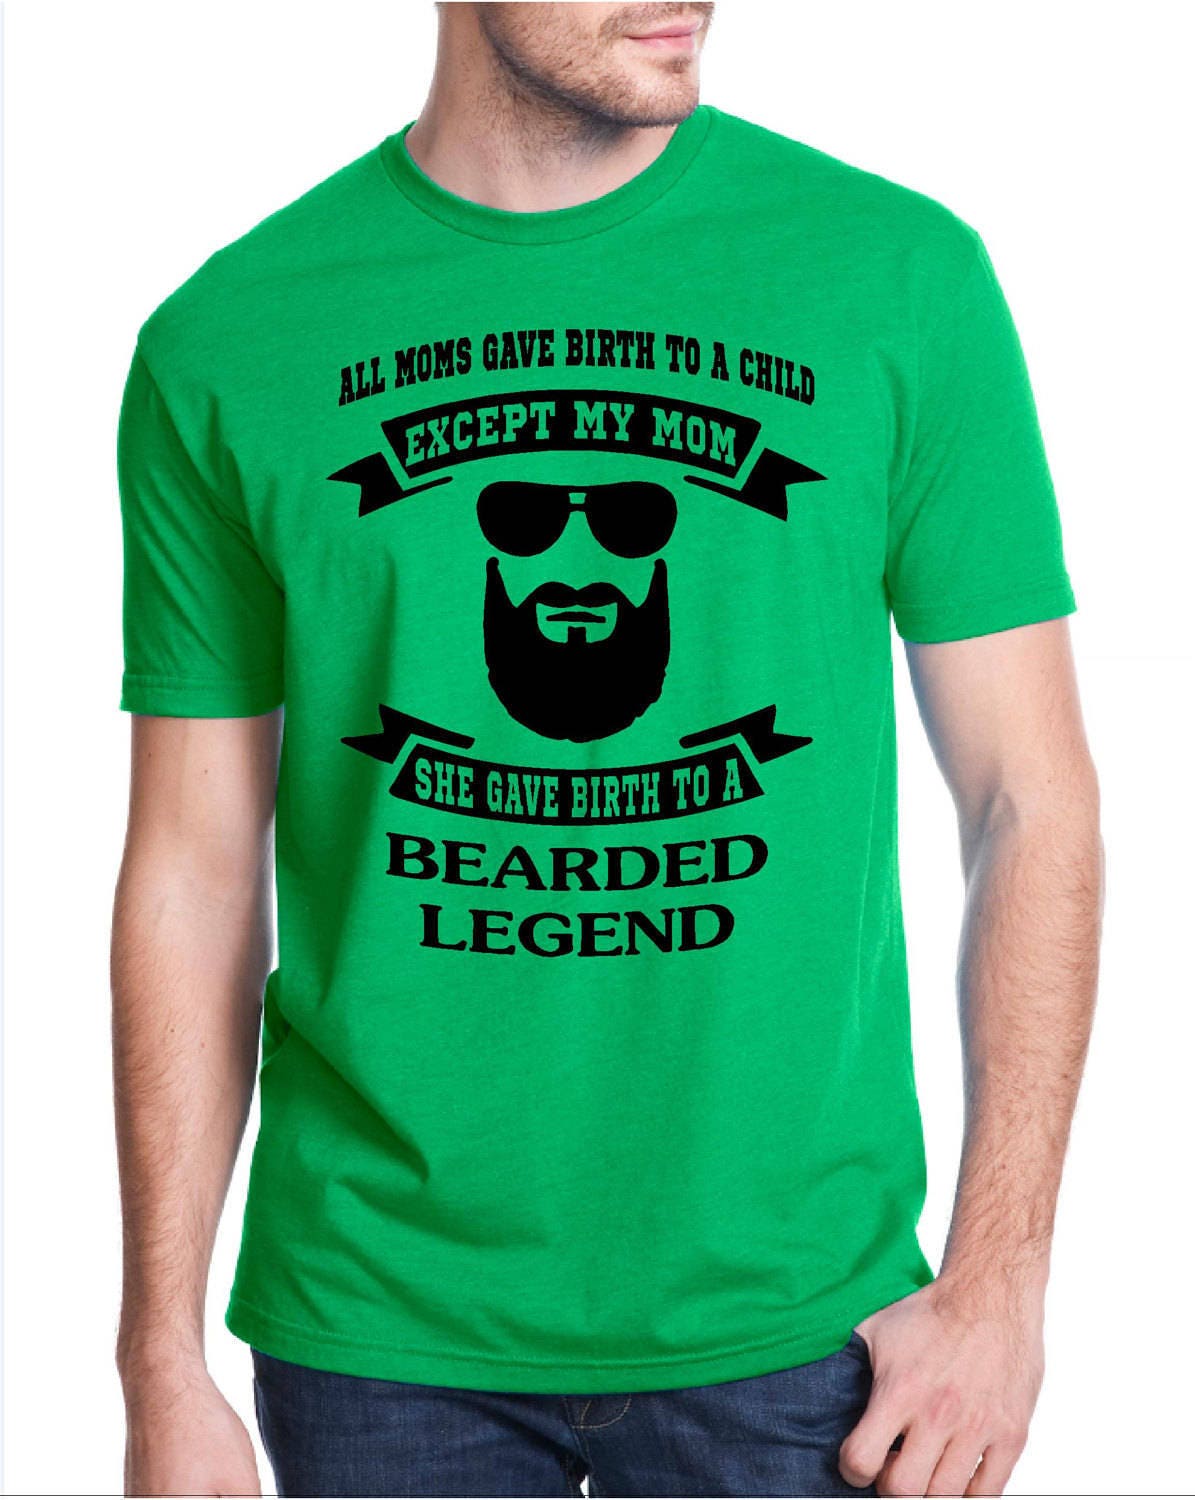 Bearded legend t-shirt All moms gave birth except my mom she